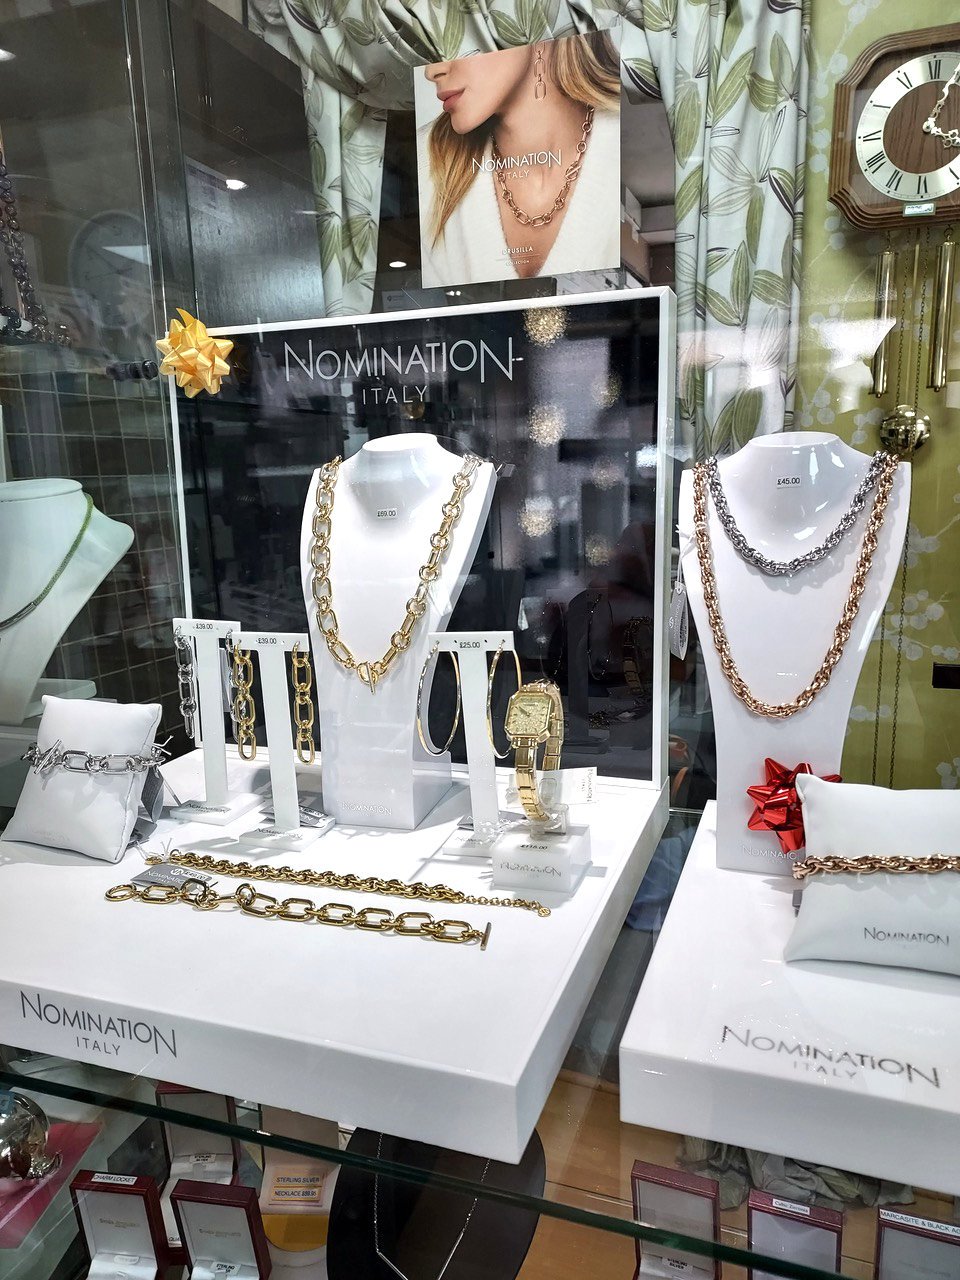 Nomination Bracelets, Beads, Charms. Earrings & Necklaces | Francis & Gaye